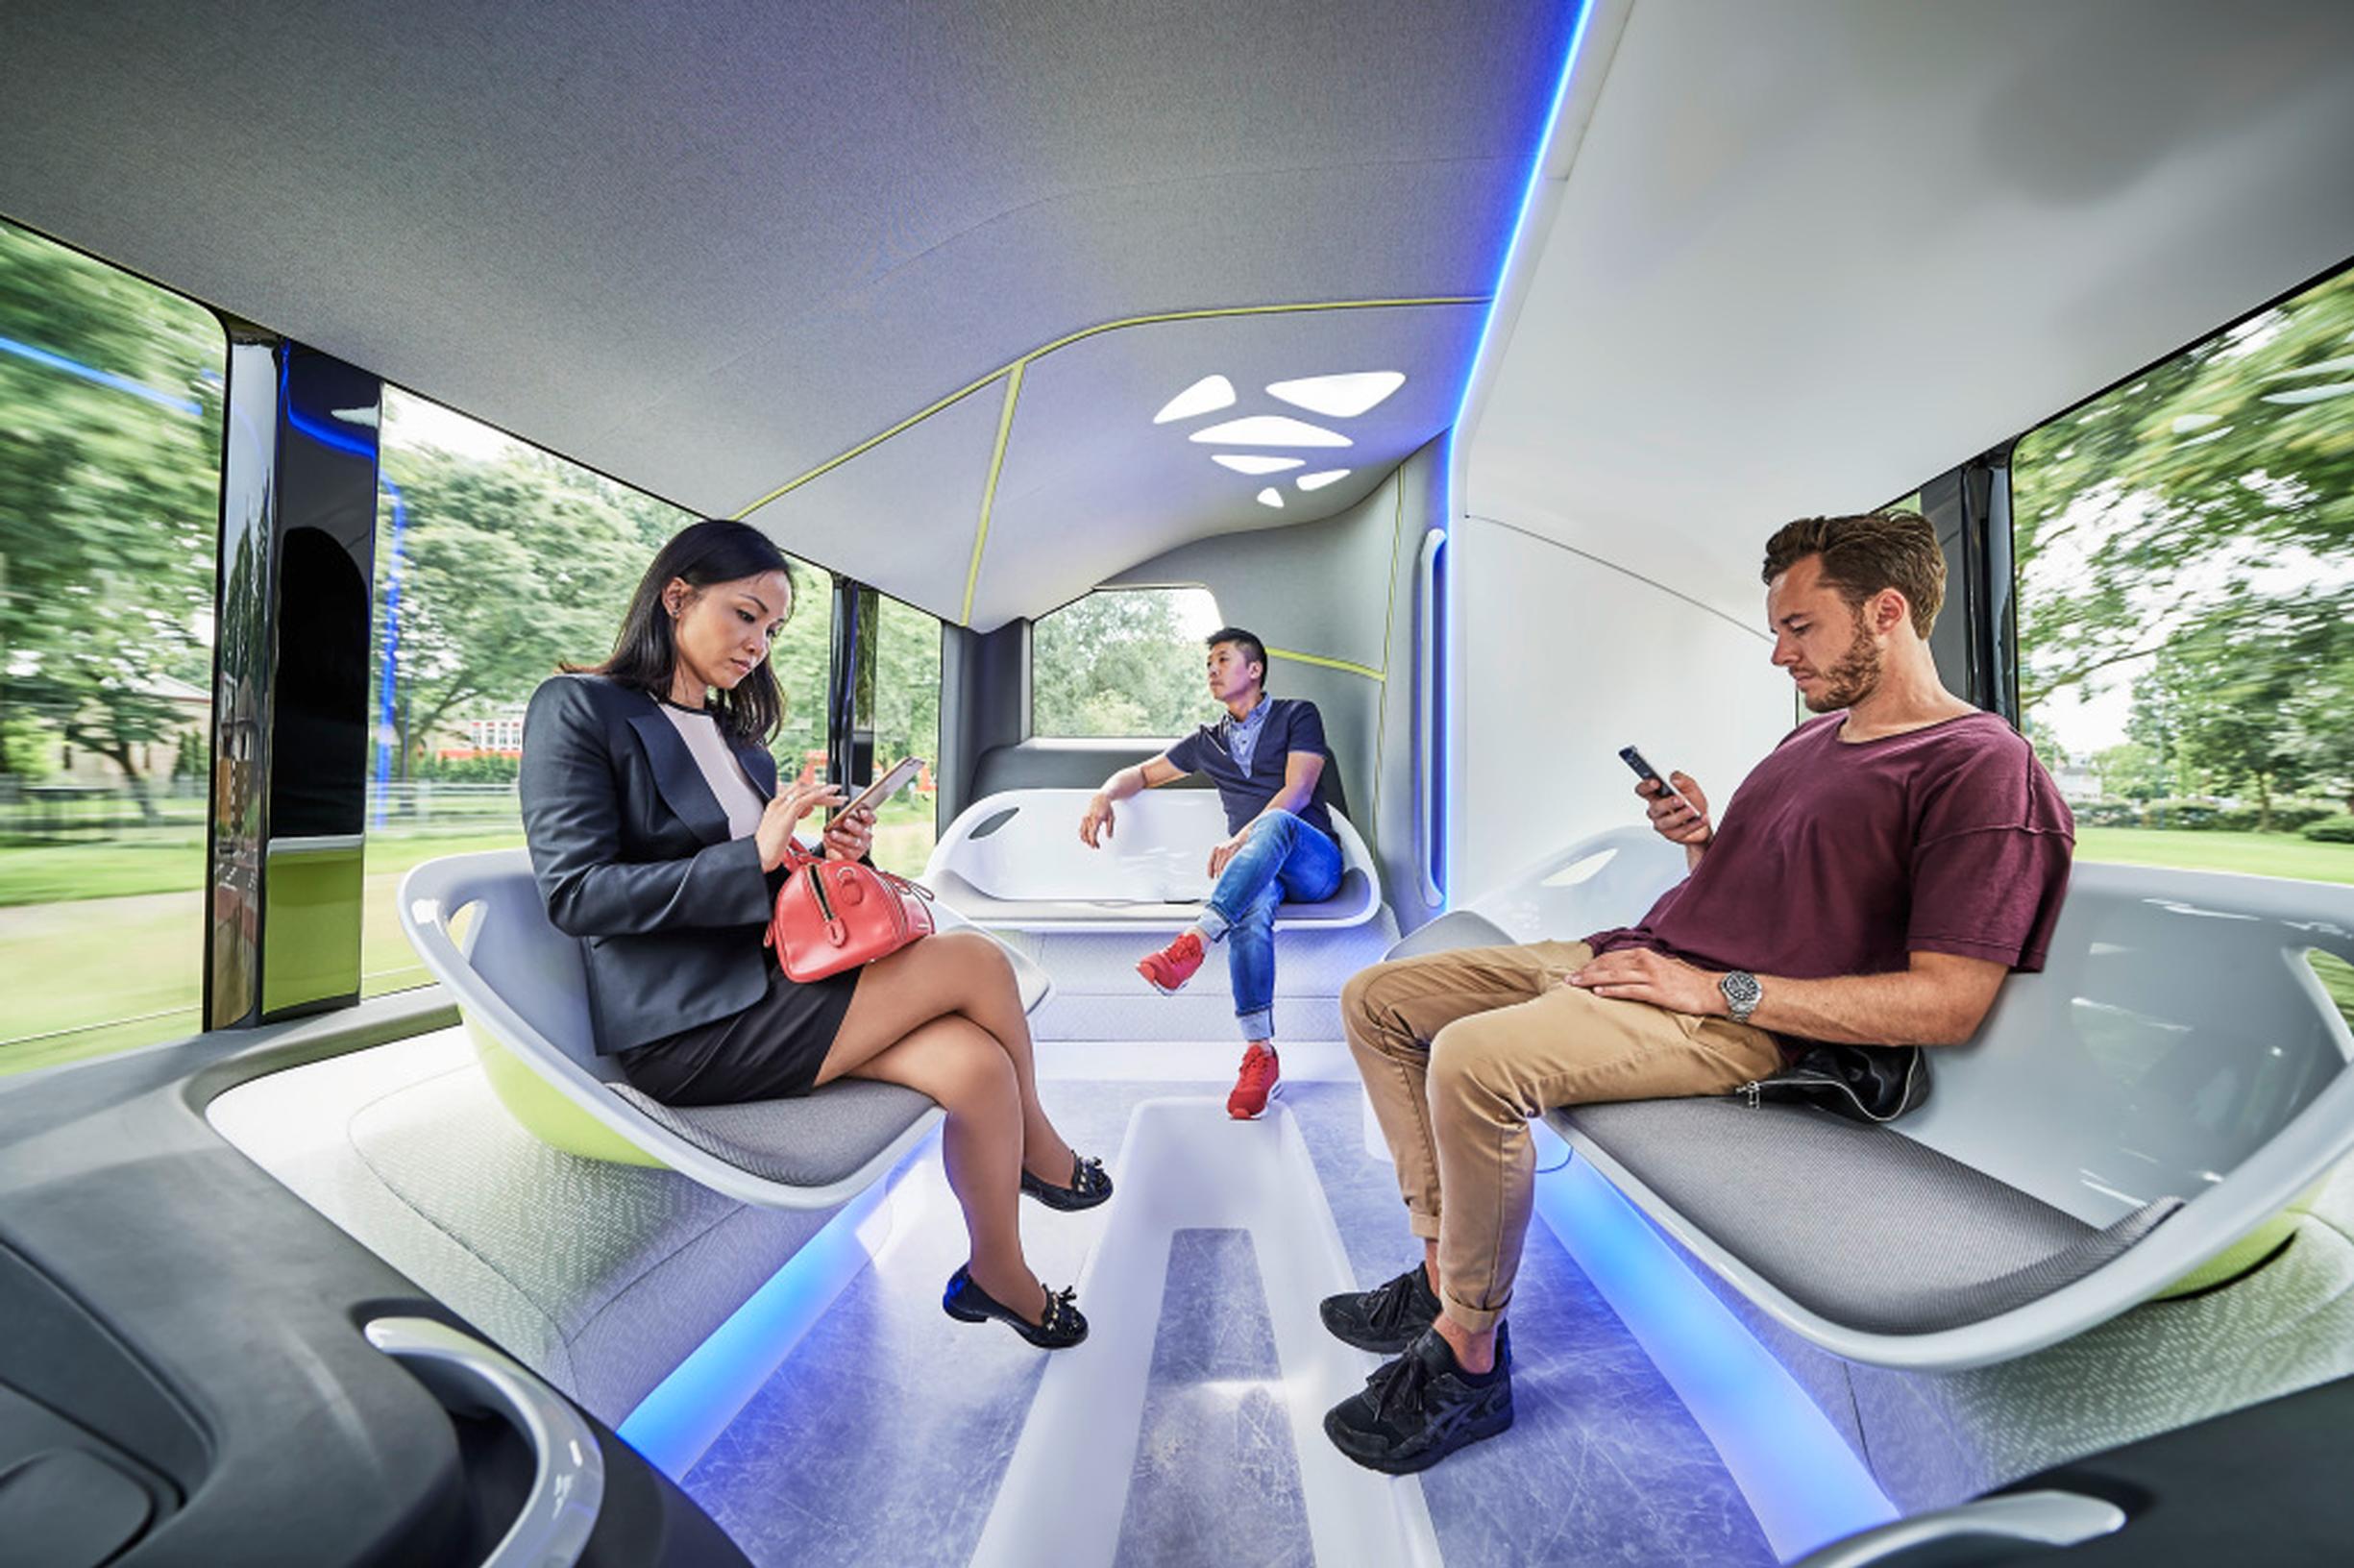 The self-driving bus is said to be 